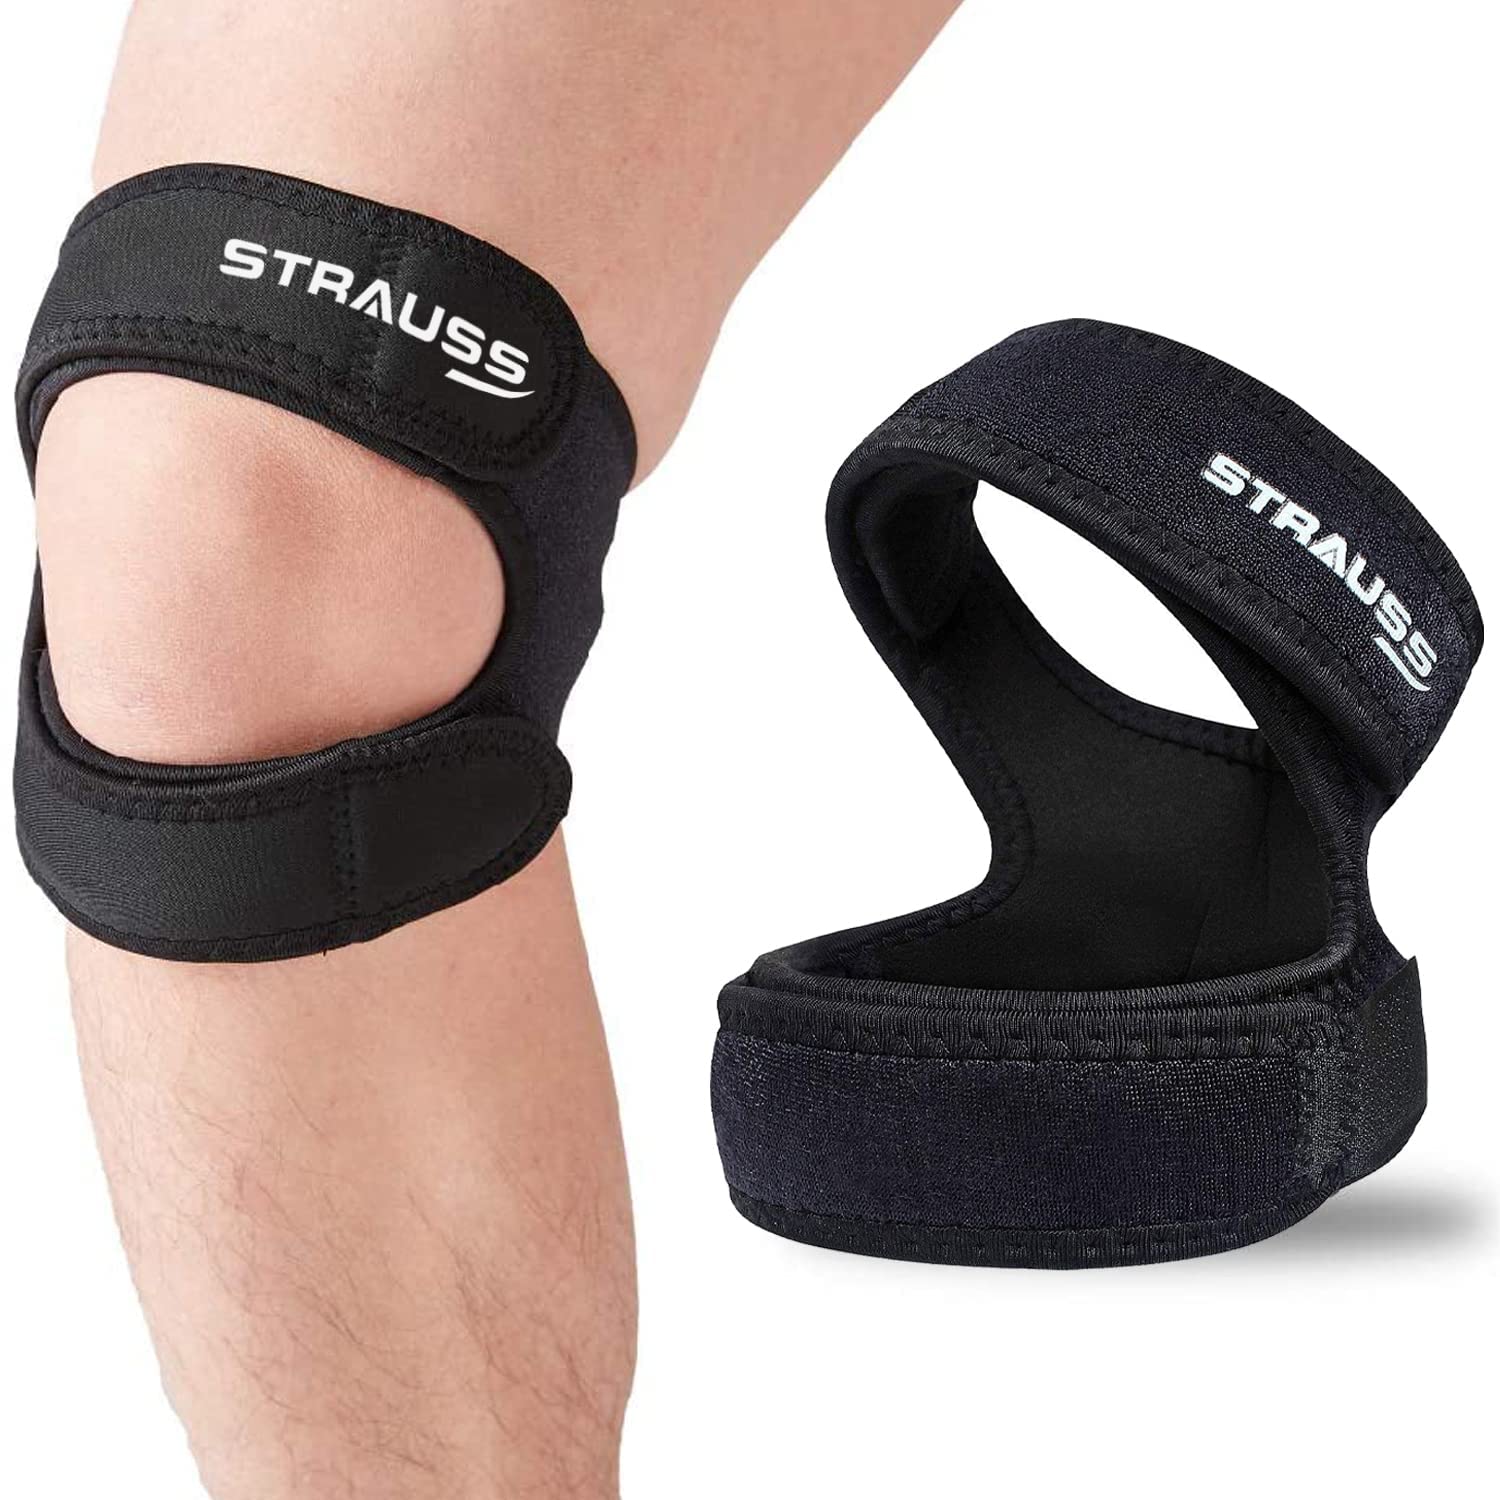 STRAUSS Adjustable Knee Support Patella (Dual Strap)| Compression Knee Brace for Men and Women